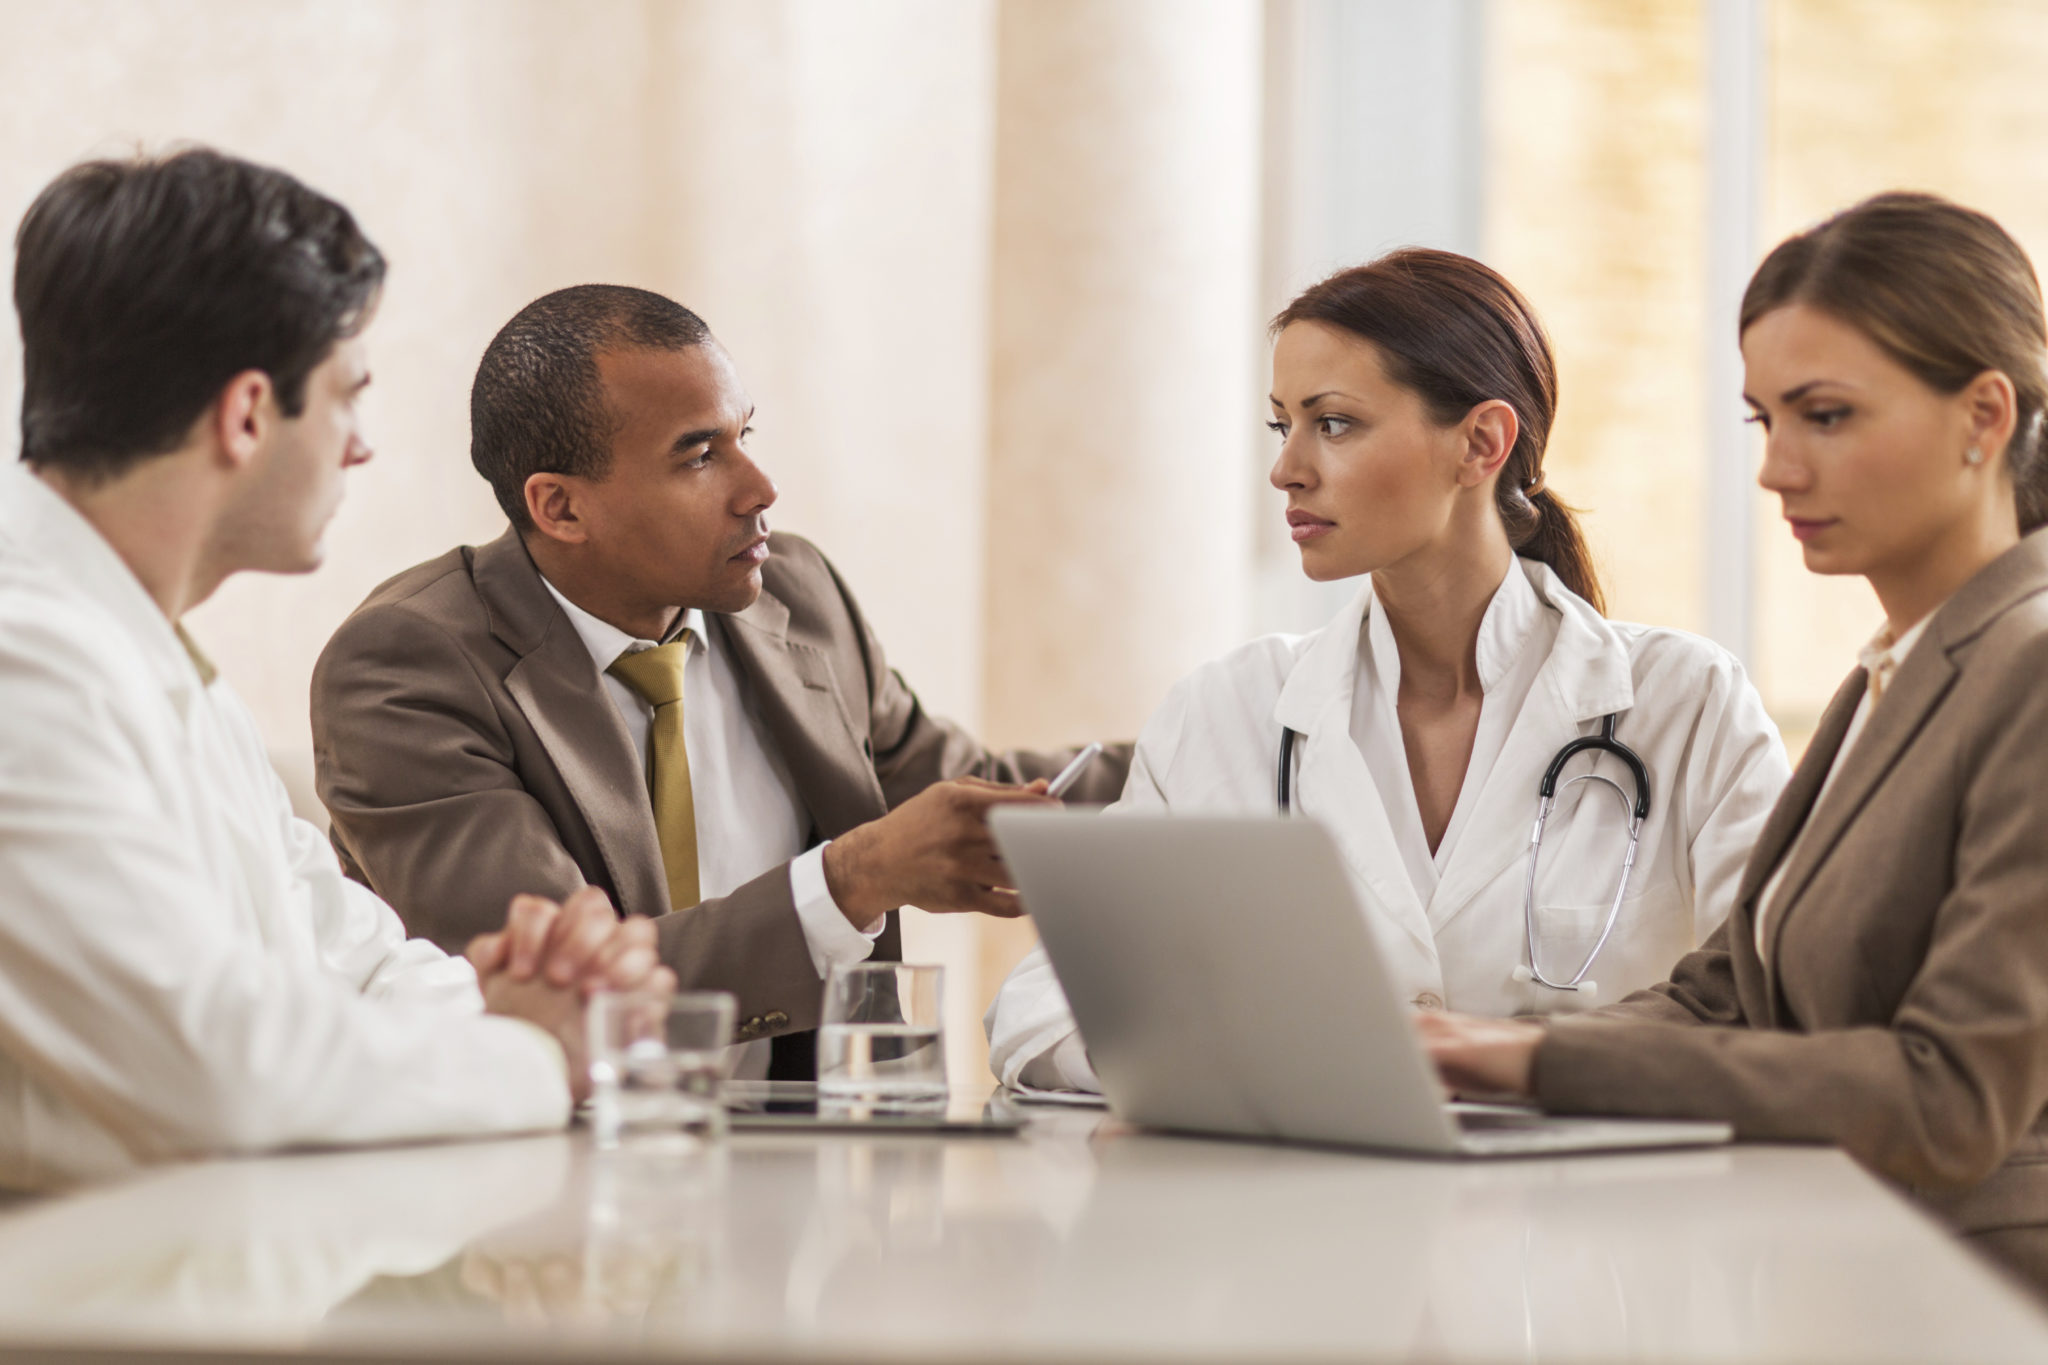 Interim Management: A Valuable Strategy for Physician Networks